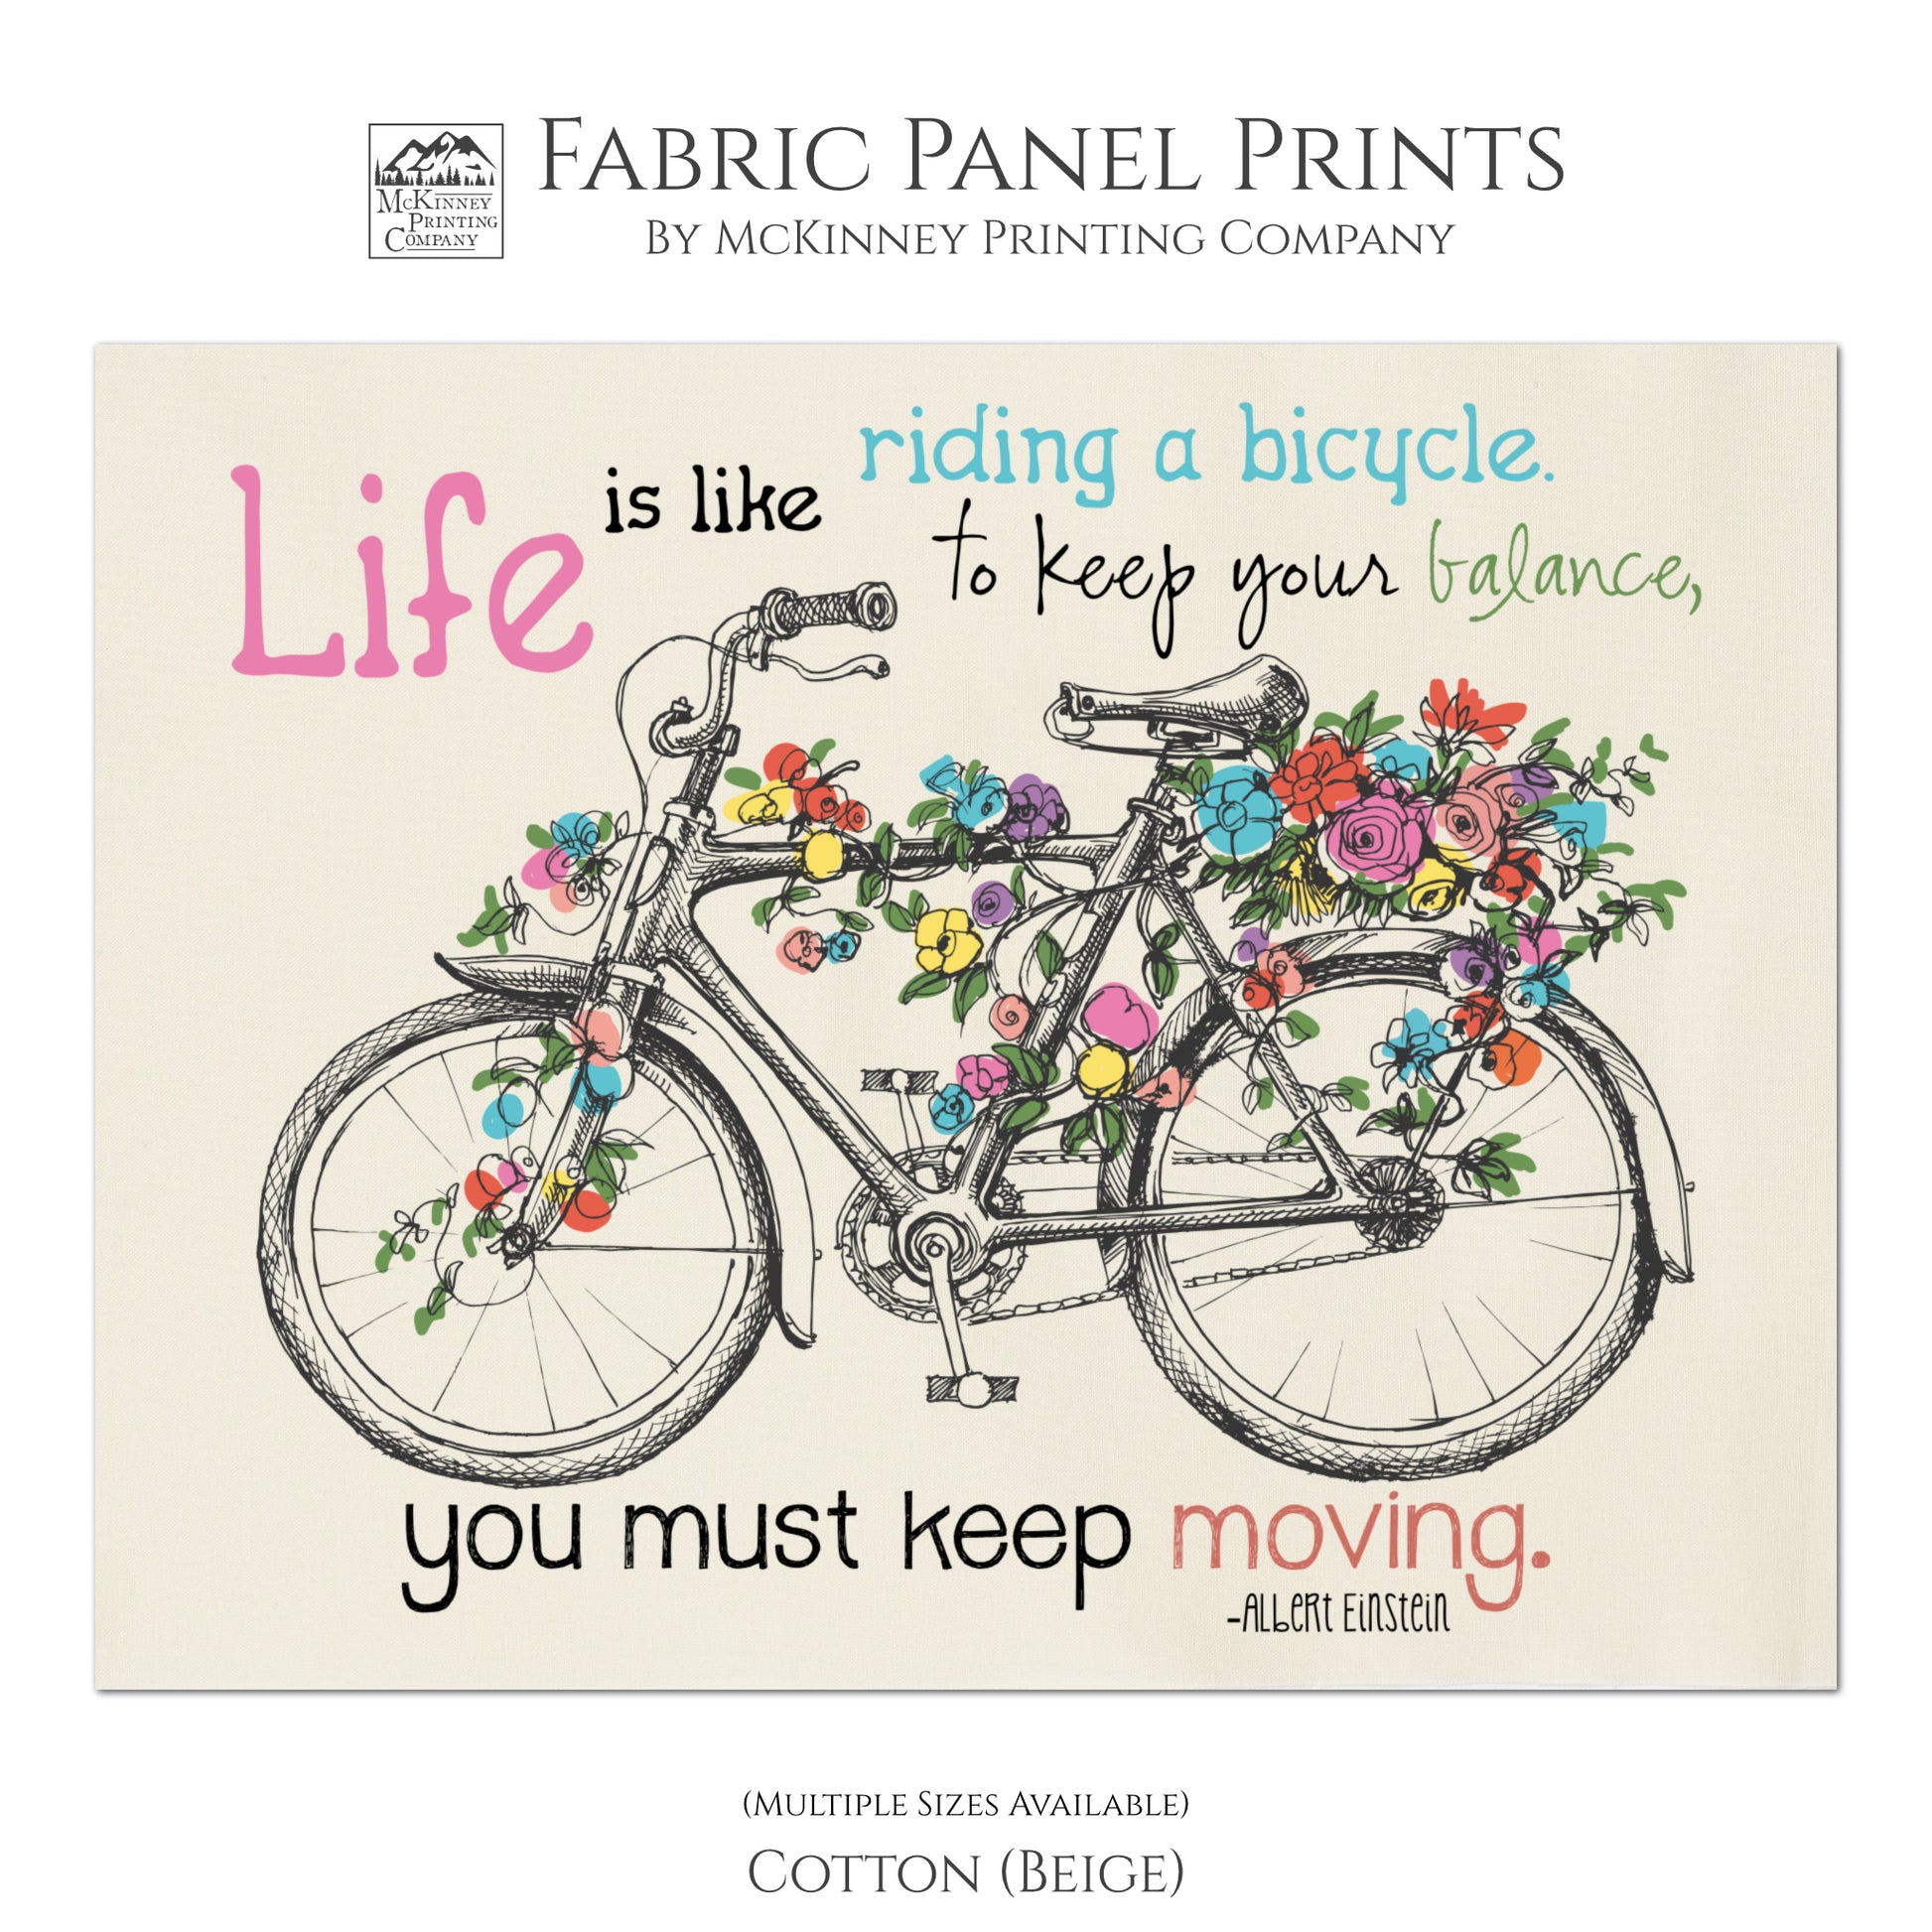 Inspirational Fabric - Albert Einstein Quotes About Life, Cotton Quilt Block, Wall Art, Bike and Flowers - Life is like riding a bicycle.  To keep your balance, you must keep moving - Cotton